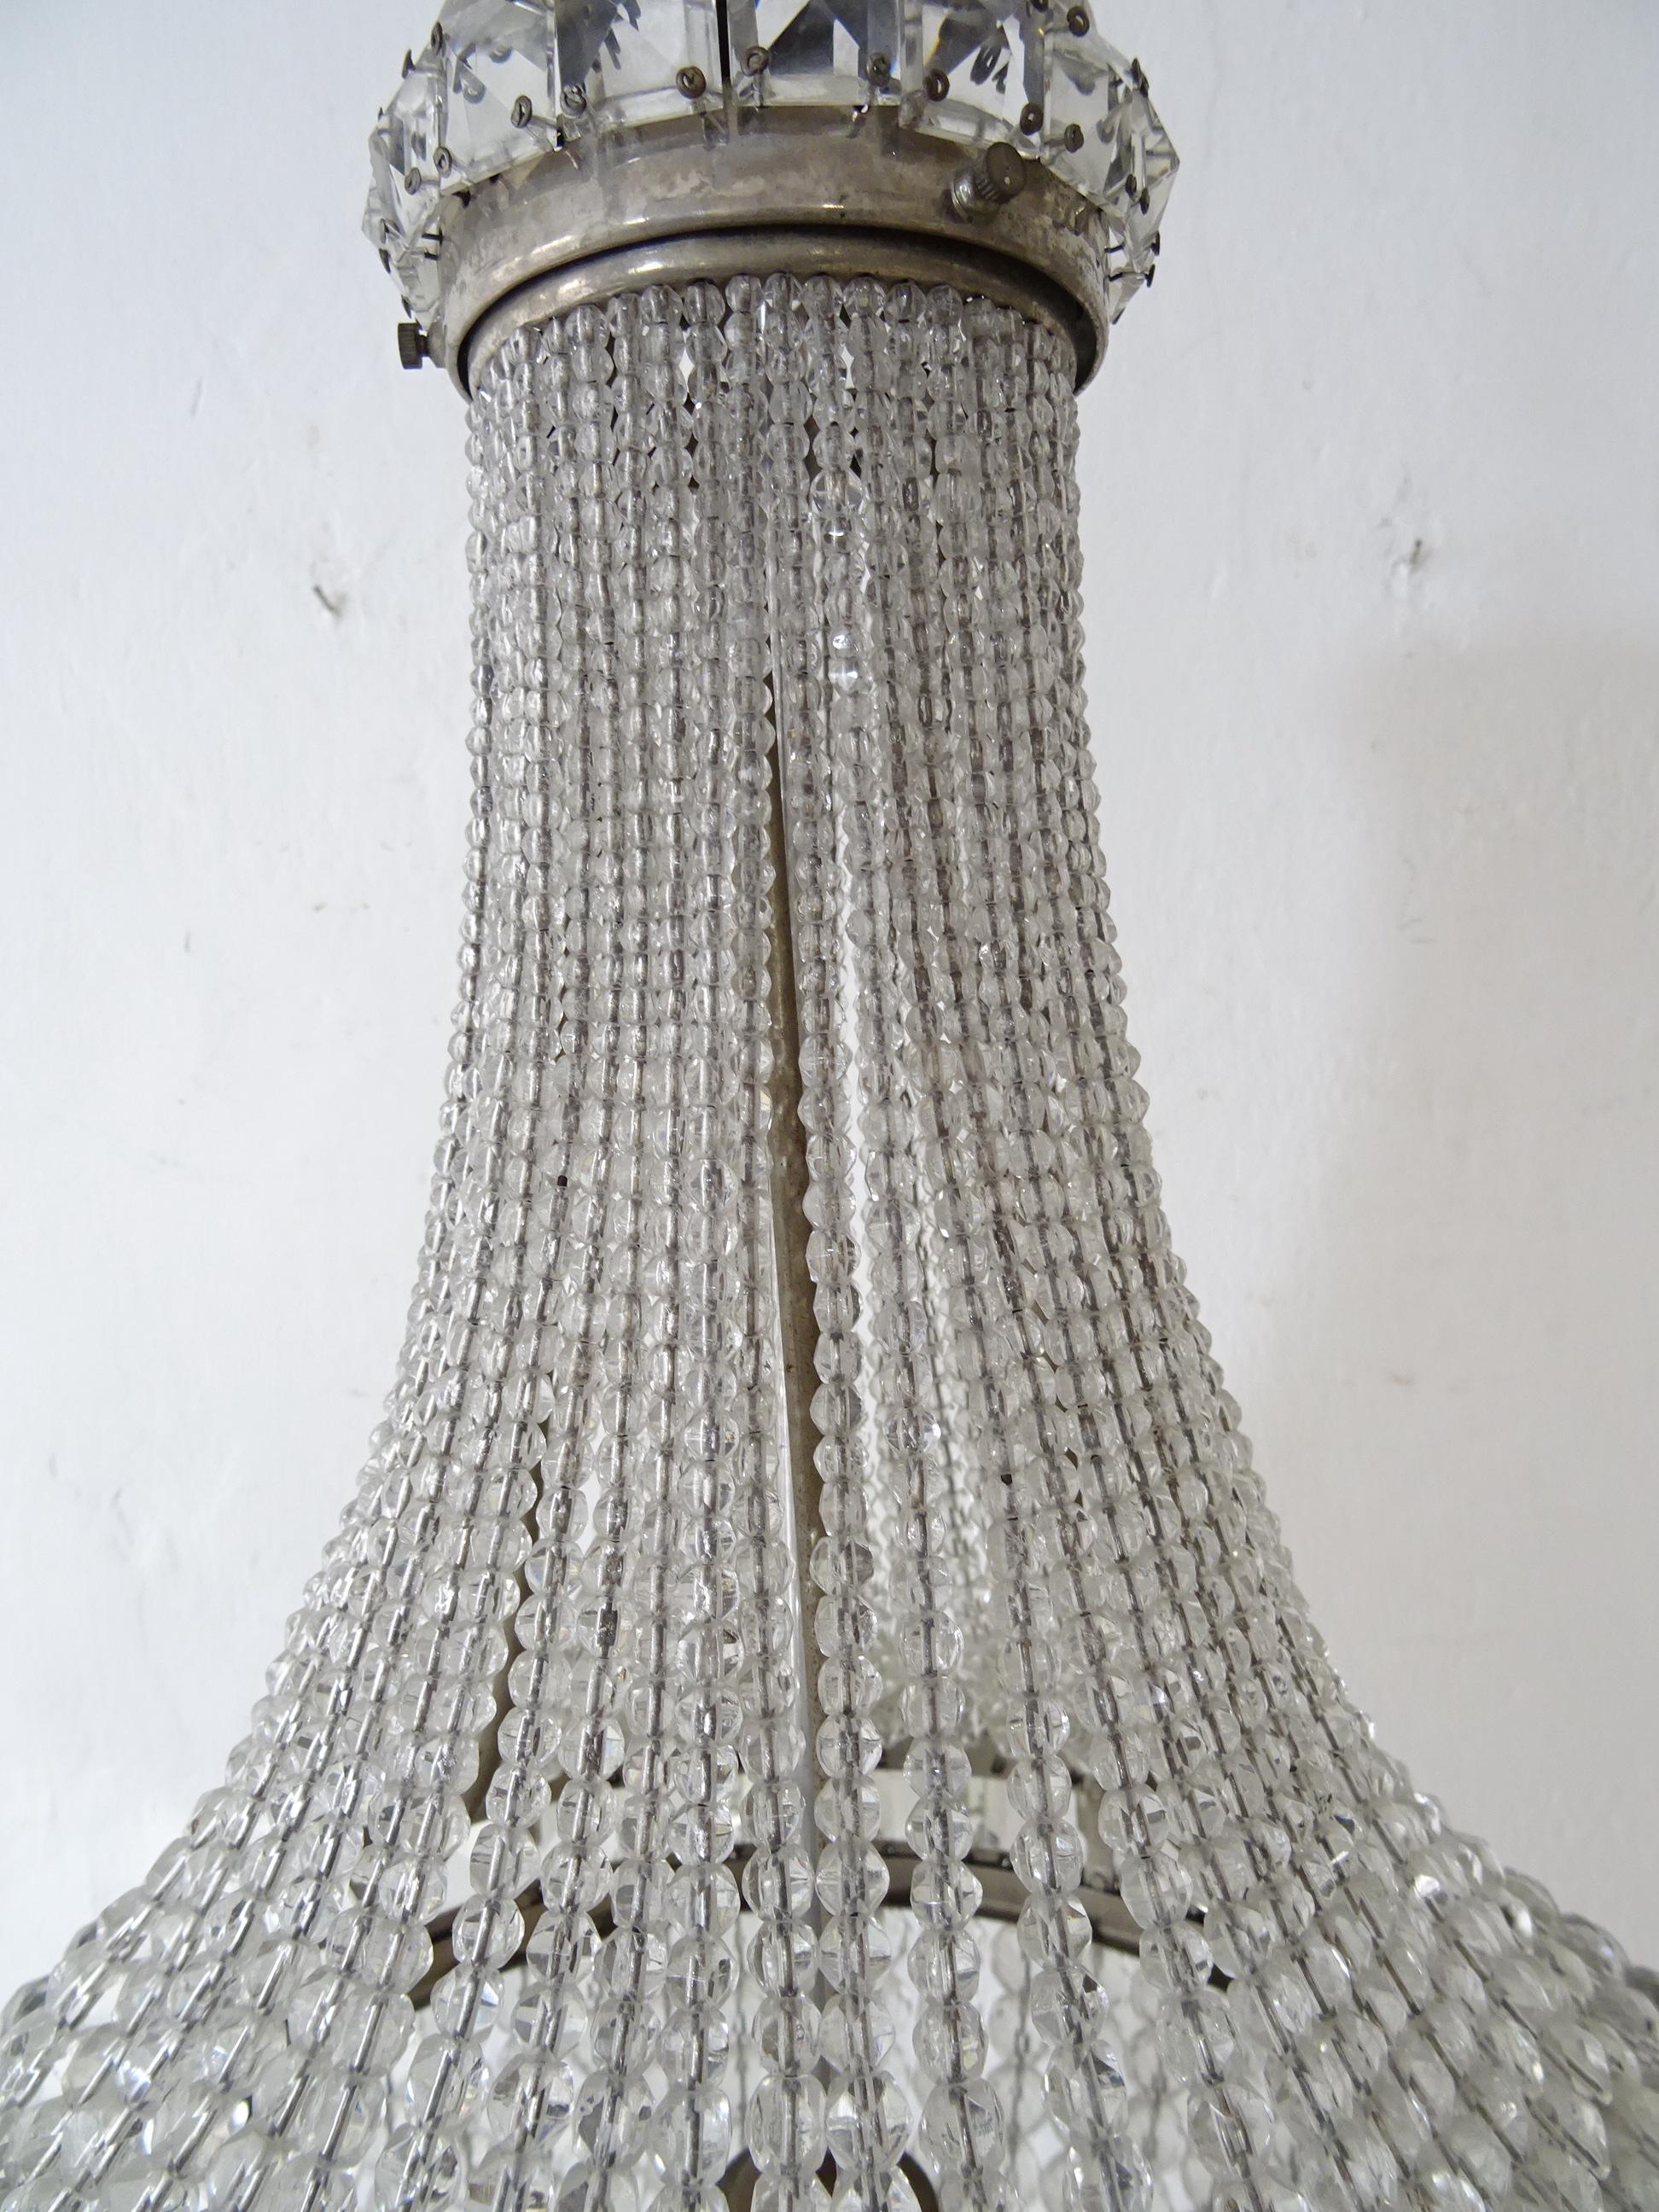 Big Crystal Beaded Empire Dome Chandelier circa 1900 In Good Condition For Sale In Modena (MO), Modena (Mo)